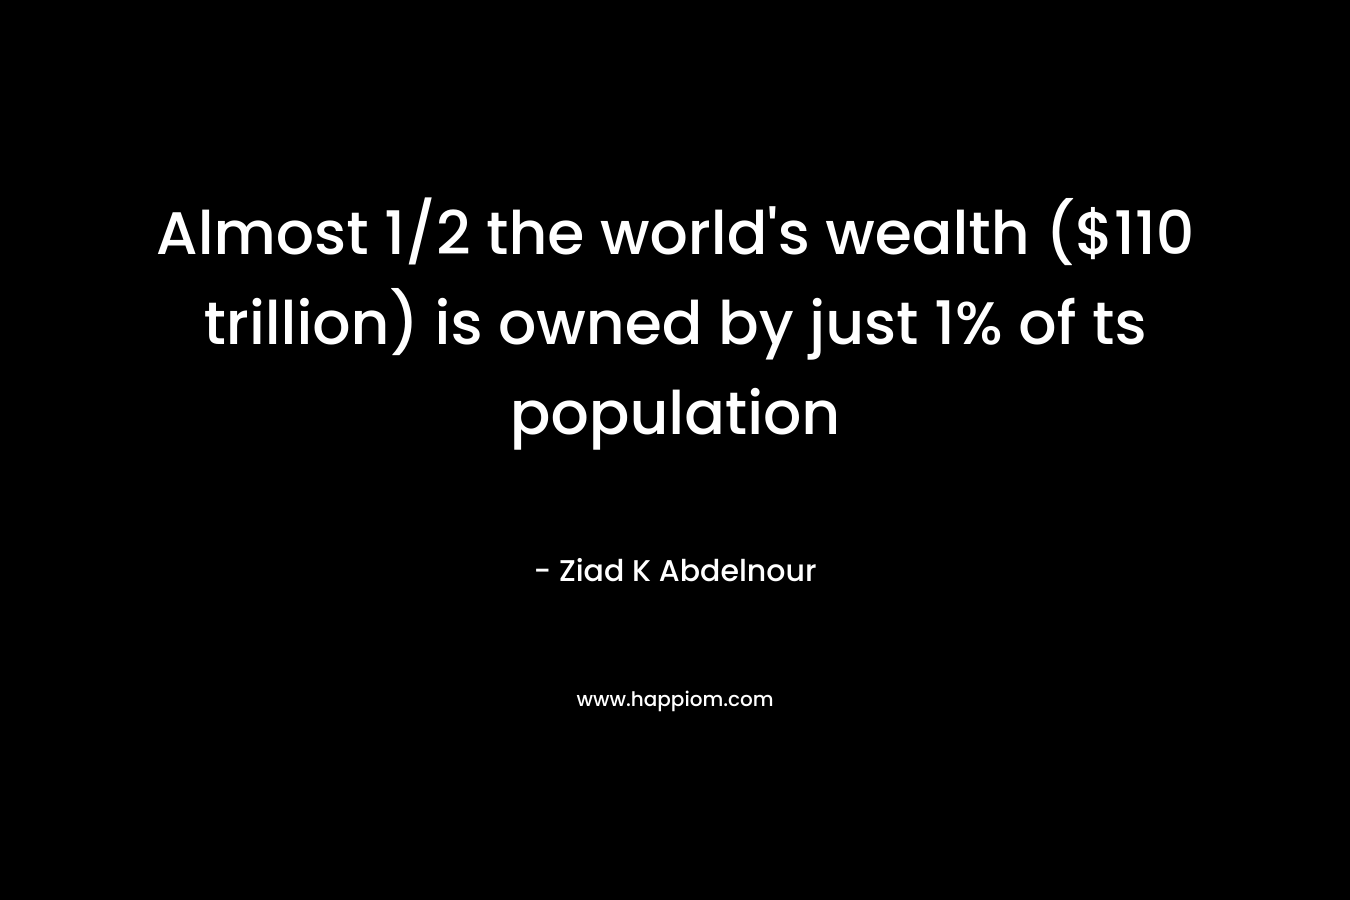 Almost 1/2 the world's wealth ($110 trillion) is owned by just 1% of ts population